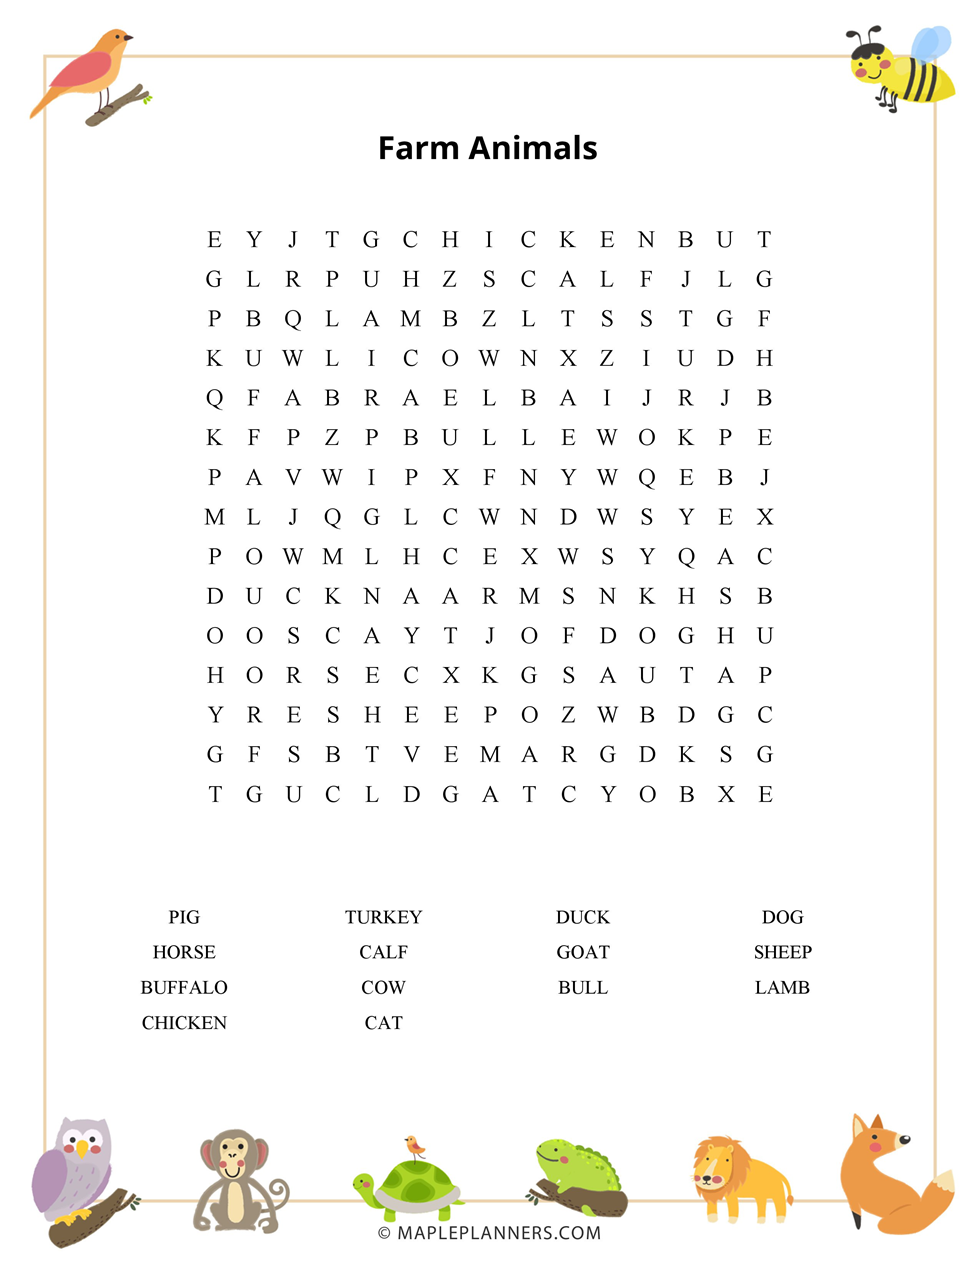 Farm Animals Word Search Puzzles